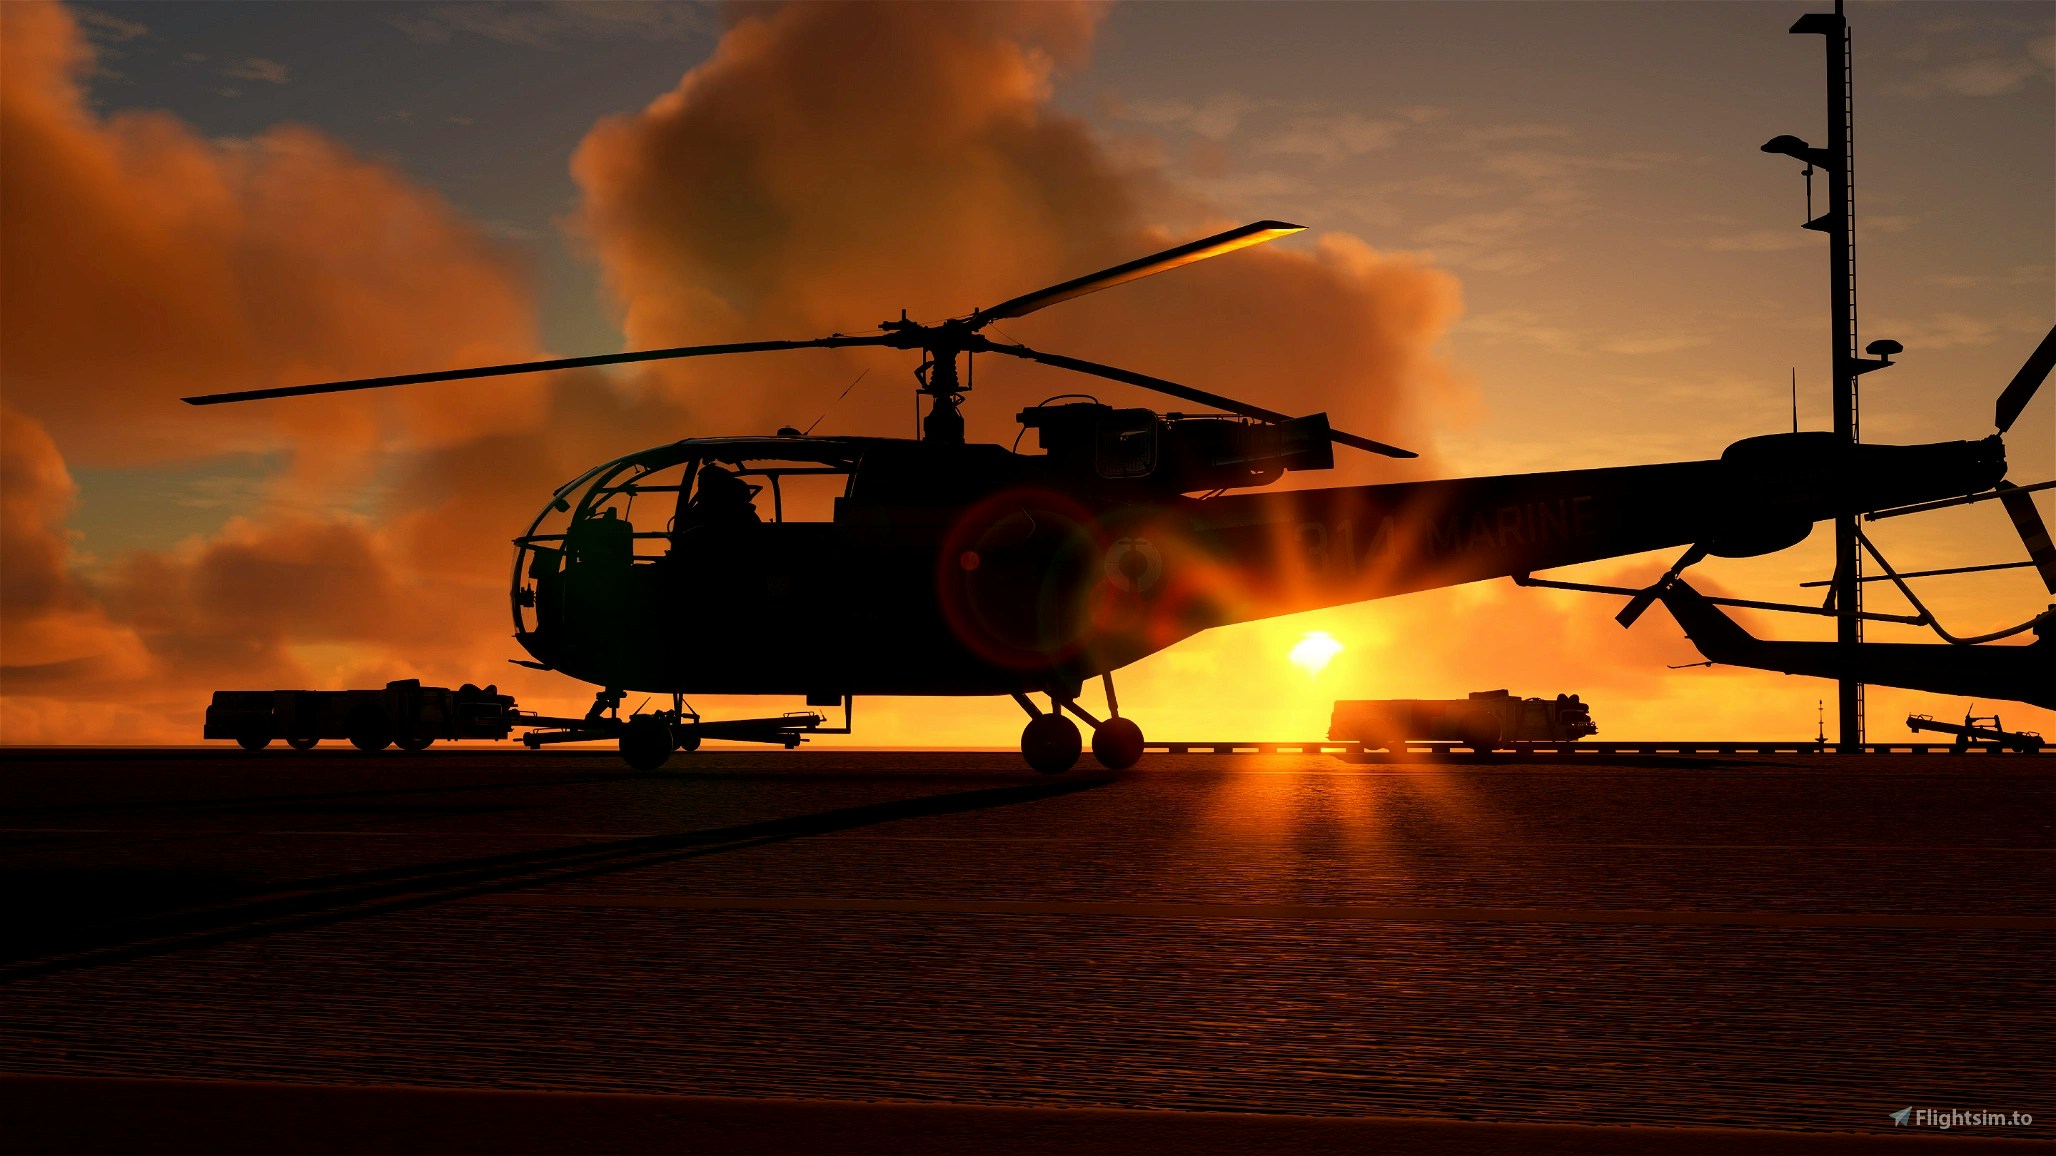 Taog's Hangar releases the Alouette III for MSFS